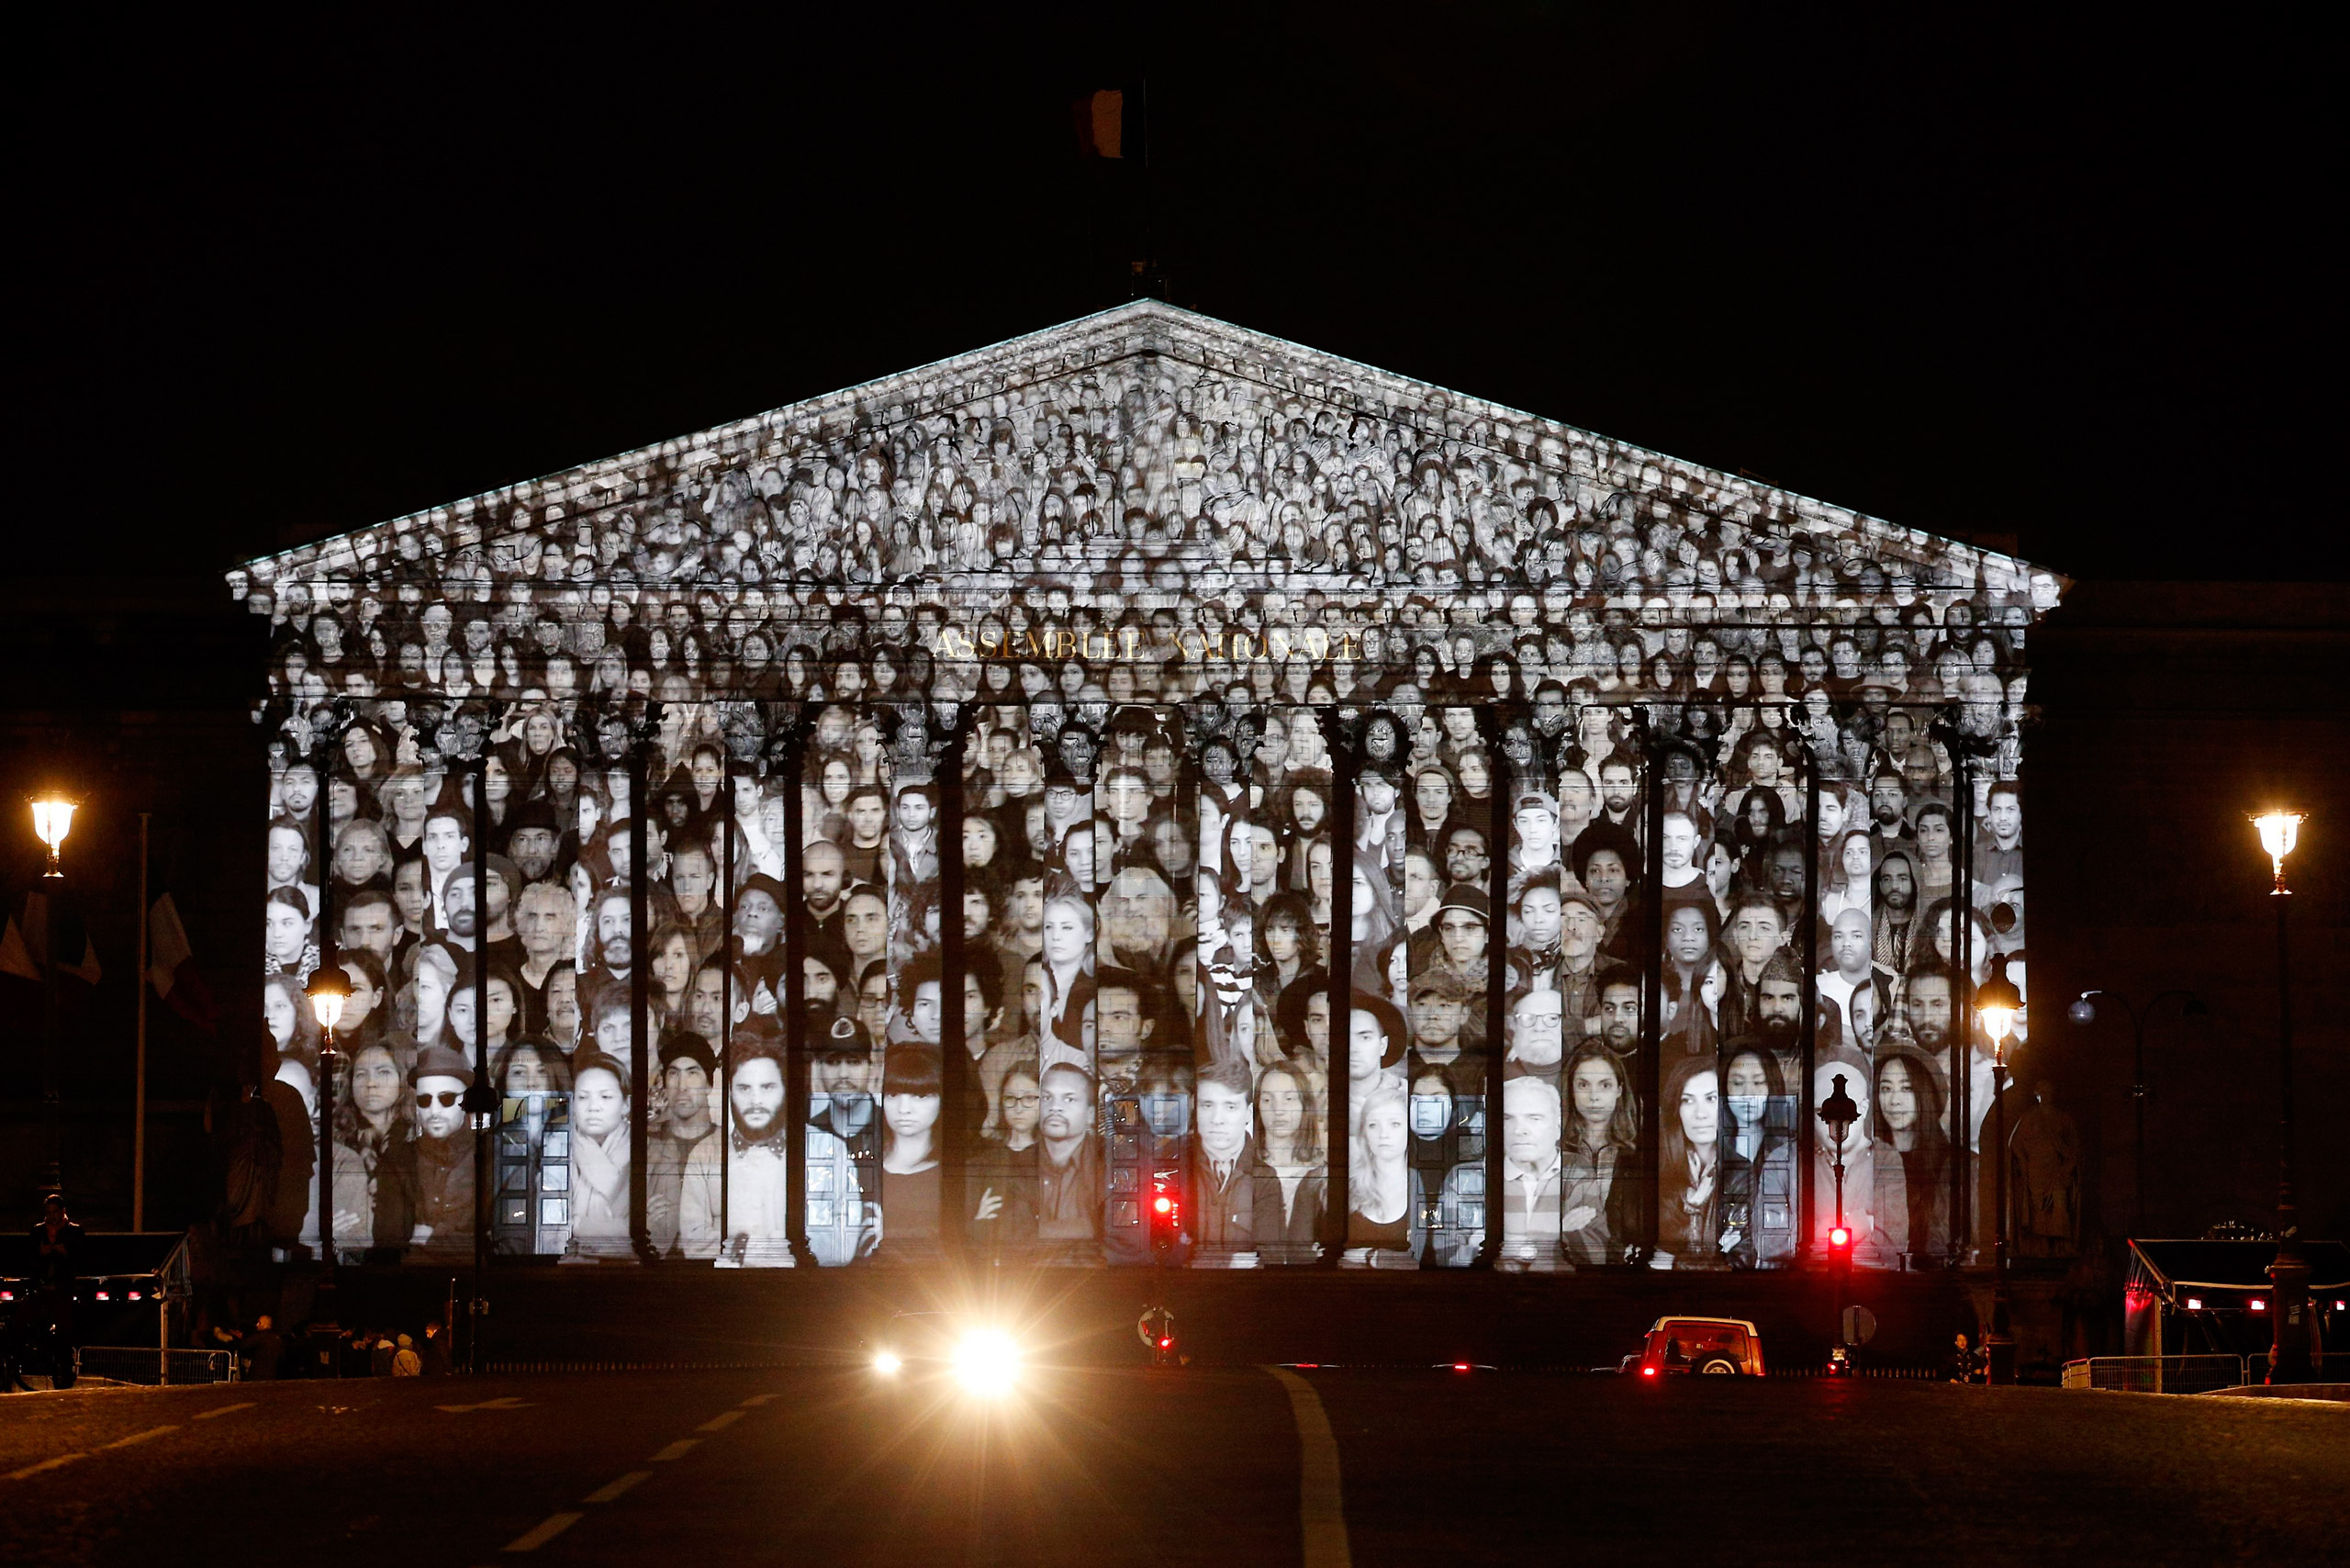 An artwork by French artist JR and U.S. filmmaker Darren Aronofsky is projected onto the French National Assembly building on the eve of the COP21 climate conference in Paris on Nov. 29 2015 (Yoan Valat—EPA)